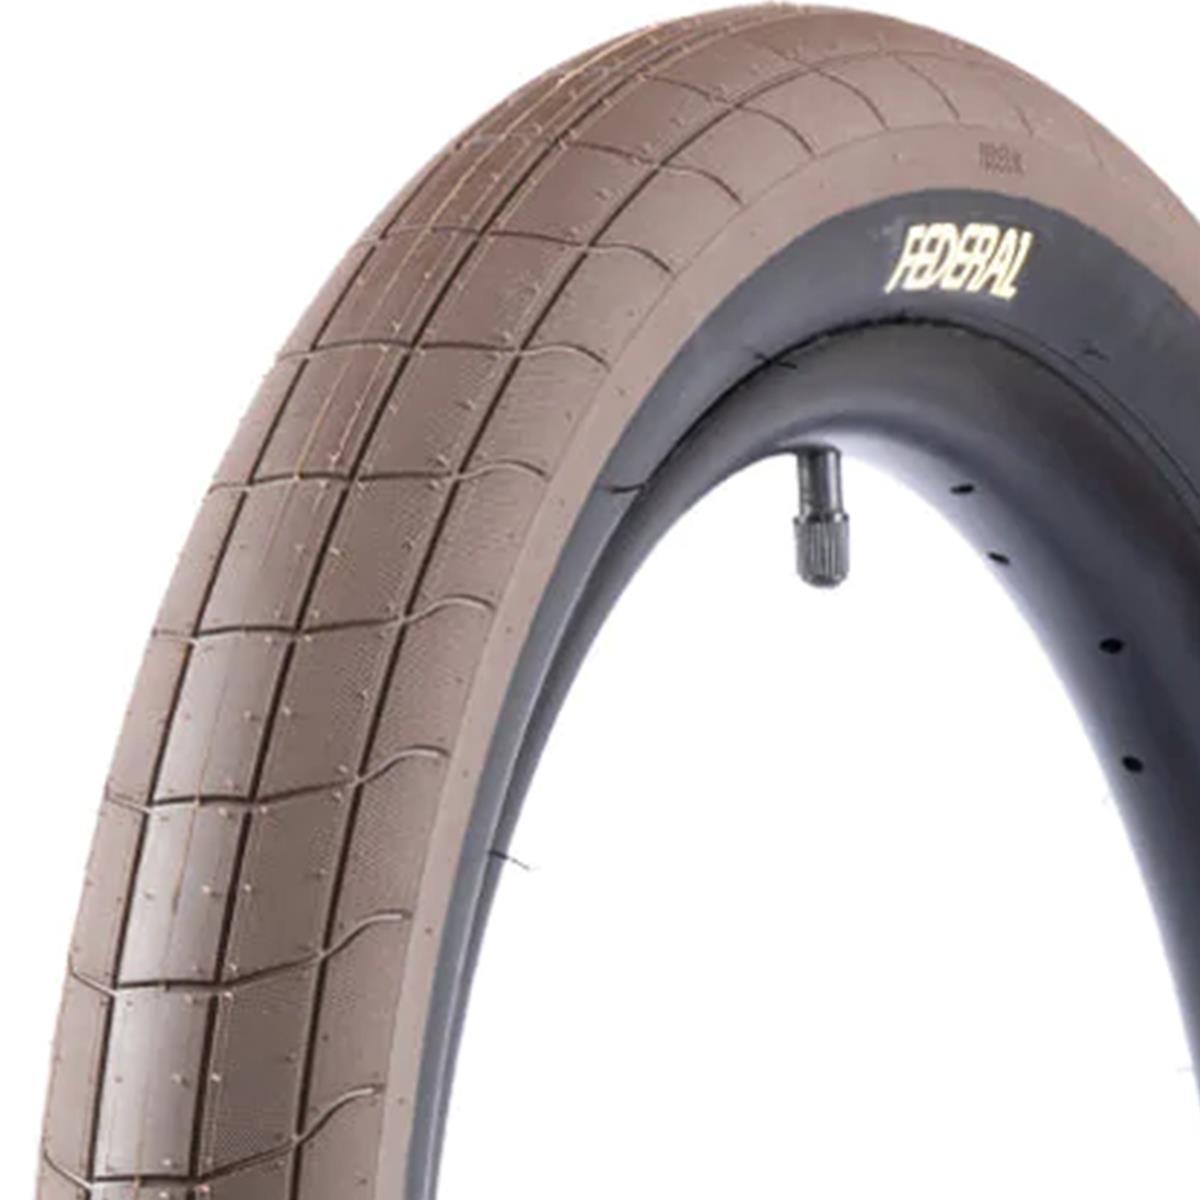 Photos - Bike Tyre Federal Neptune Tyre Brown with Black Sidewall / 2.35" SG35453 